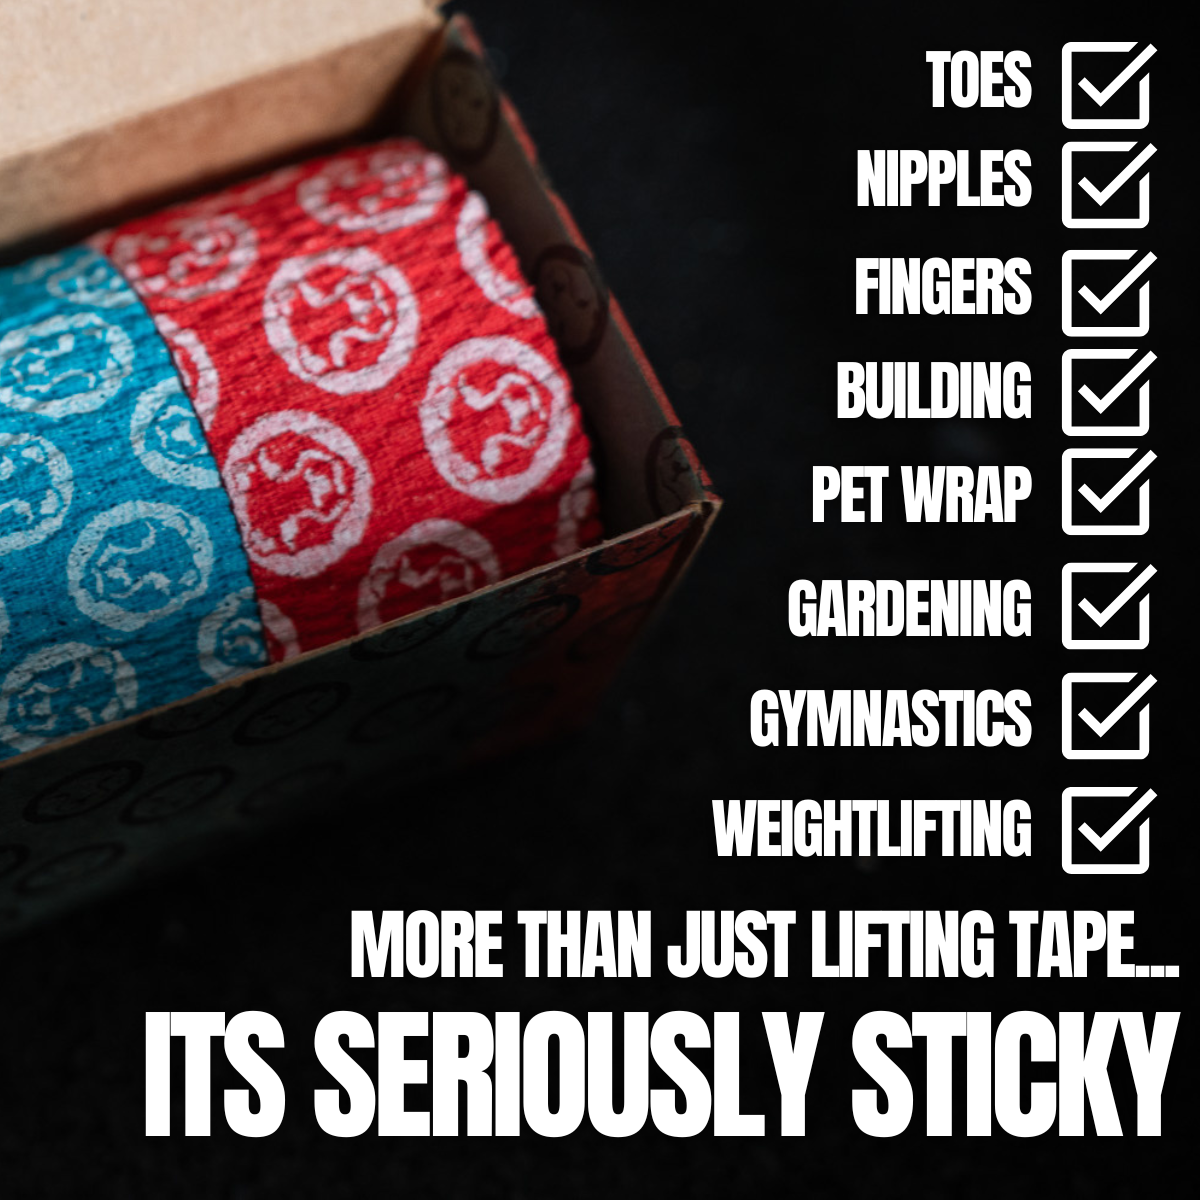 Thumb &amp; Weightlifting Tape - Mammal Tape 5-Metre Rolls (3-Pack) (NEWEST EDITION)